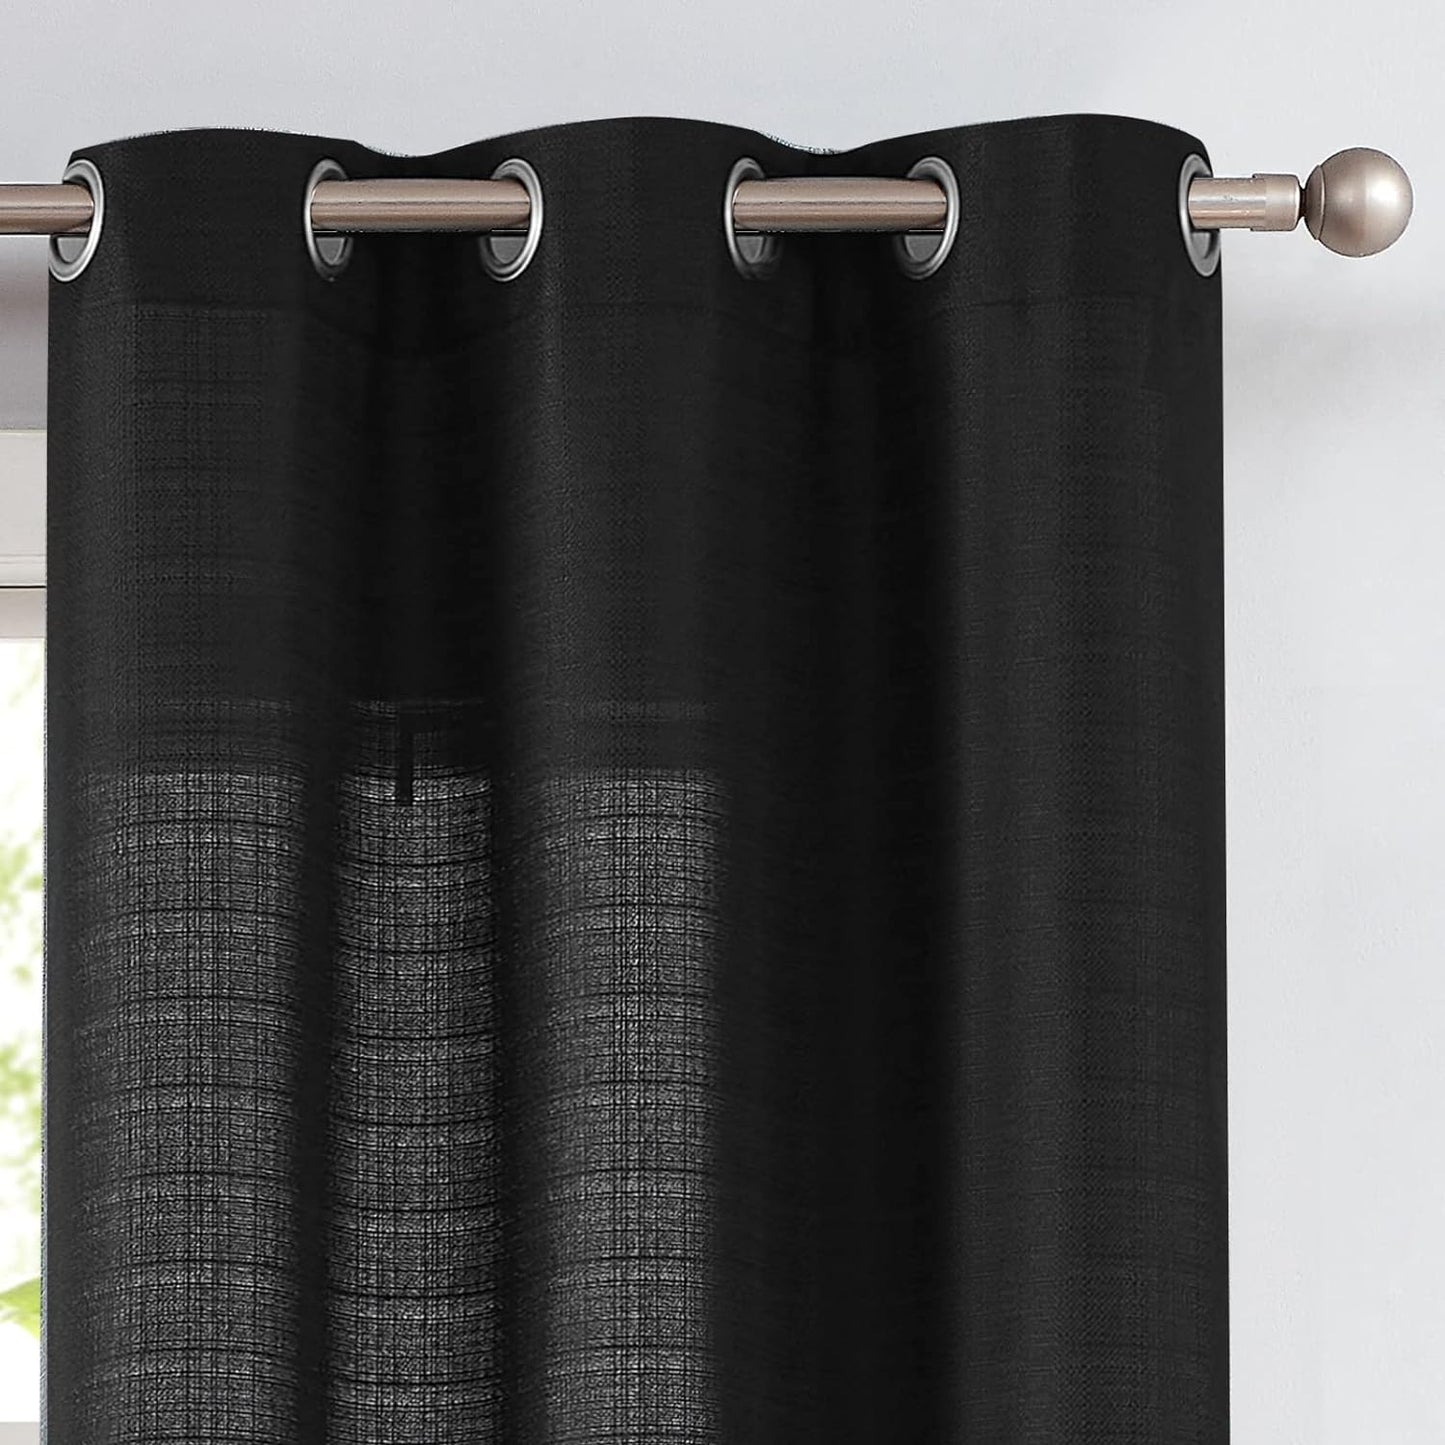 Jinchan Curtains for Bedroom Living Room 84 Inch Long Room Darkening Farmhouse Country Window Curtains Heathered Denim Blue Curtains Grommet Curtains Drapes 2 Panels  CKNY HOME FASHION Grommet Black 38"W X 84"L 